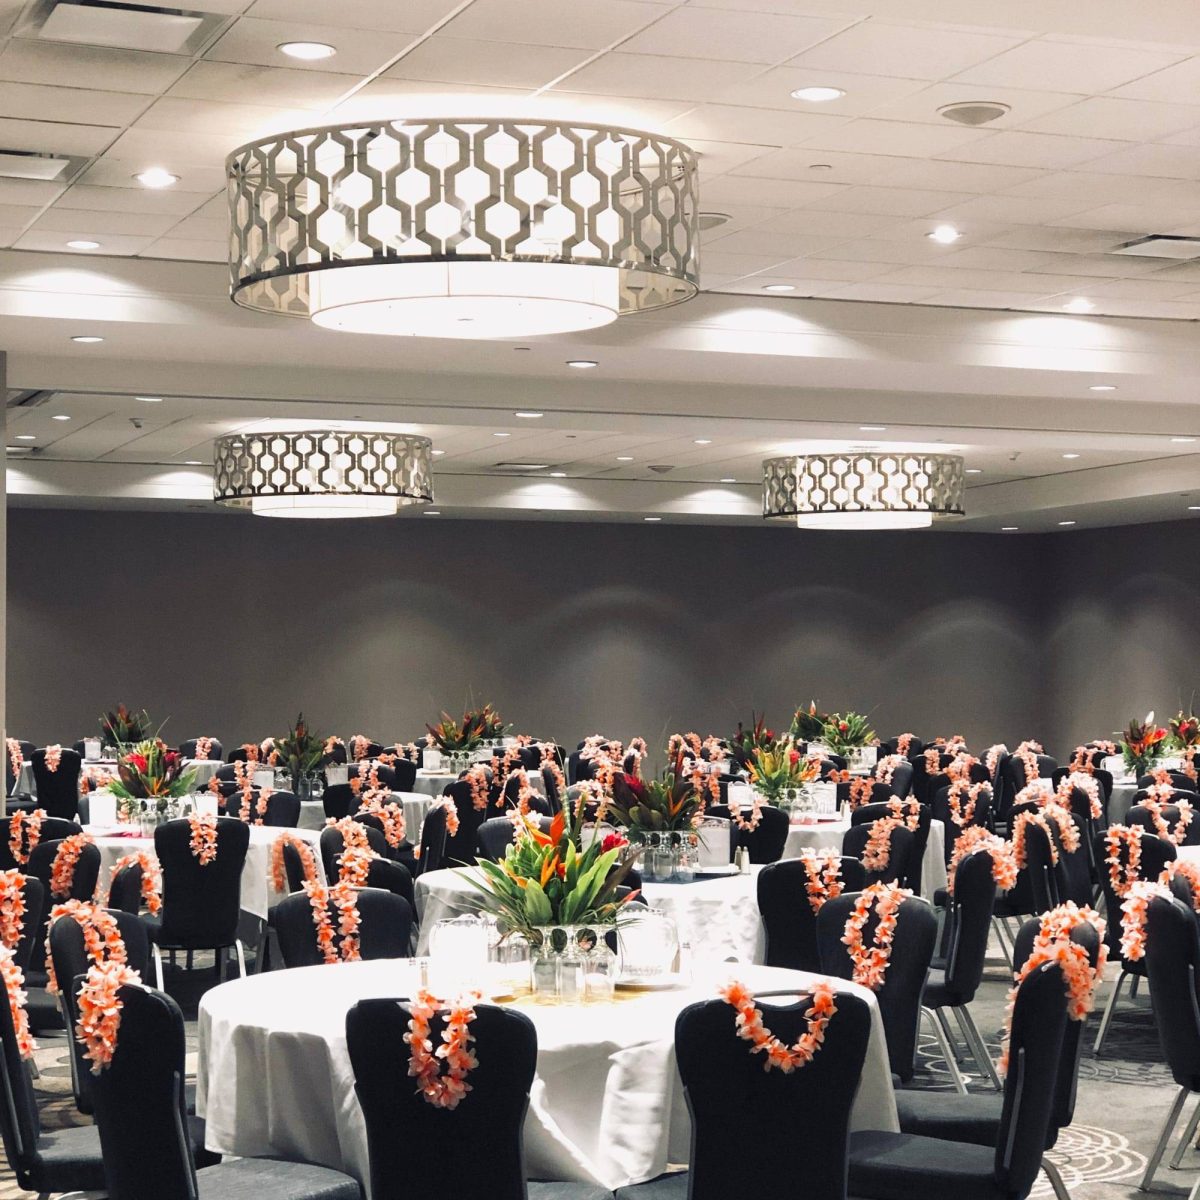 Richmond Conference Centre Ballroom for Business Events & Parties. An elegant & stylish venue w/ chairs & tables, space for networking & socialize